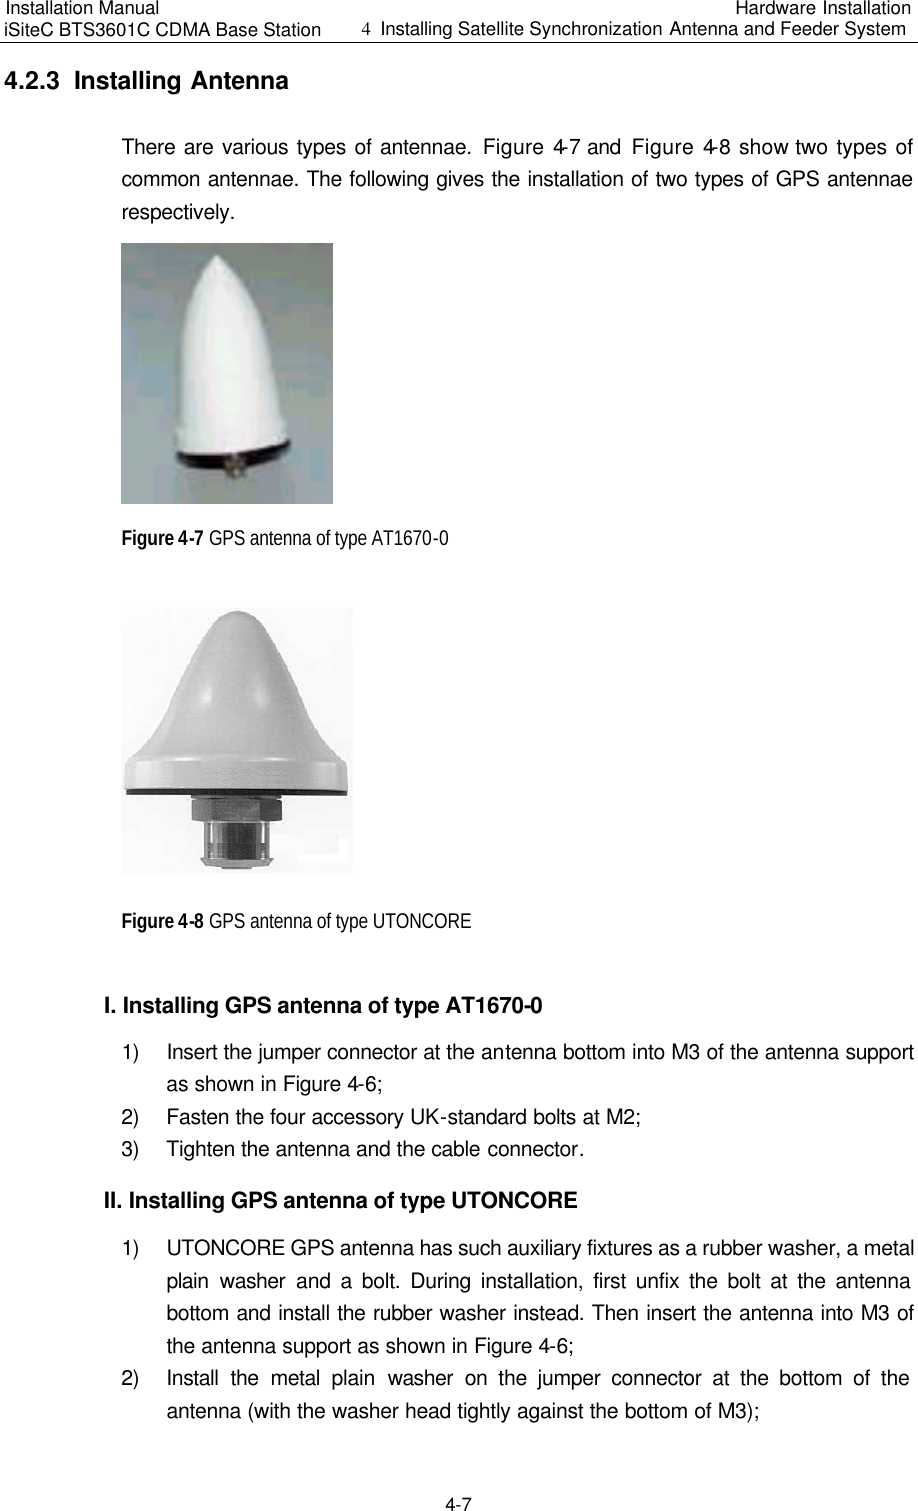 Installation Manual   iSiteC BTS3601C CDMA Base Station Hardware Installation 4  Installing Satellite Synchronization Antenna and Feeder System  4-7 4.2.3  Installing Antenna　There are various types of antennae. Figure 4-7 and  Figure 4-8 show two types of common antennae. The following gives the installation of two types of GPS antennae respectively.　　Figure 4-7 GPS antenna of type AT1670-0　　Figure 4-8 GPS antenna of type UTONCORE　I. Installing GPS antenna of type AT1670-0　1) Insert the jumper connector at the antenna bottom into M3 of the antenna support as shown in Figure 4-6;　2) Fasten the four accessory UK-standard bolts at M2;　3) Tighten the antenna and the cable connector.　II. Installing GPS antenna of type UTONCORE　1) UTONCORE GPS antenna has such auxiliary fixtures as a rubber washer, a metal plain washer and a bolt. During installation, first unfix the bolt at the antenna bottom and install the rubber washer instead. Then insert the antenna into M3 of the antenna support as shown in Figure 4-6;　2) Install the metal plain  washer on the jumper connector at the bottom of the antenna (with the washer head tightly against the bottom of M3);　